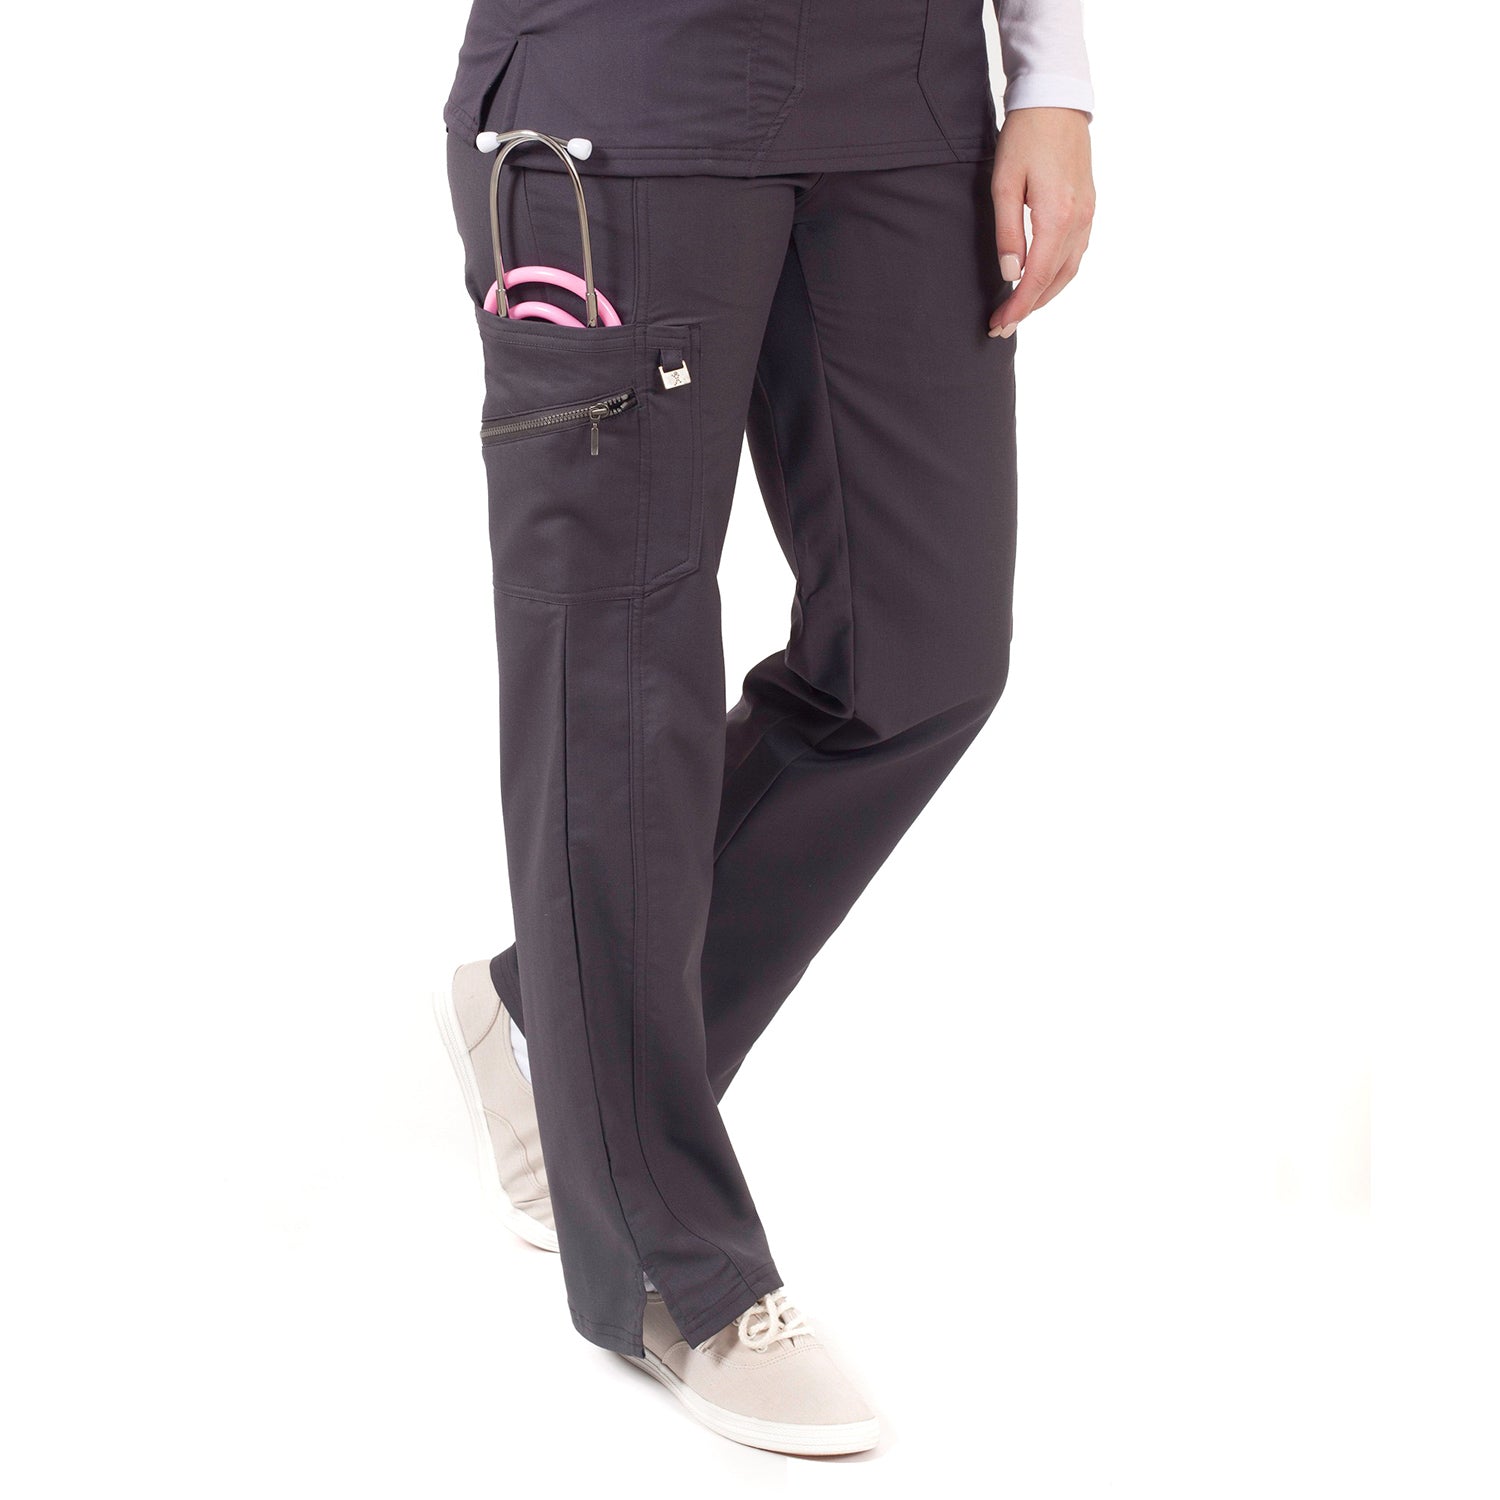 Trending Wholesale 3/4 cargo pants for women At Affordable Prices